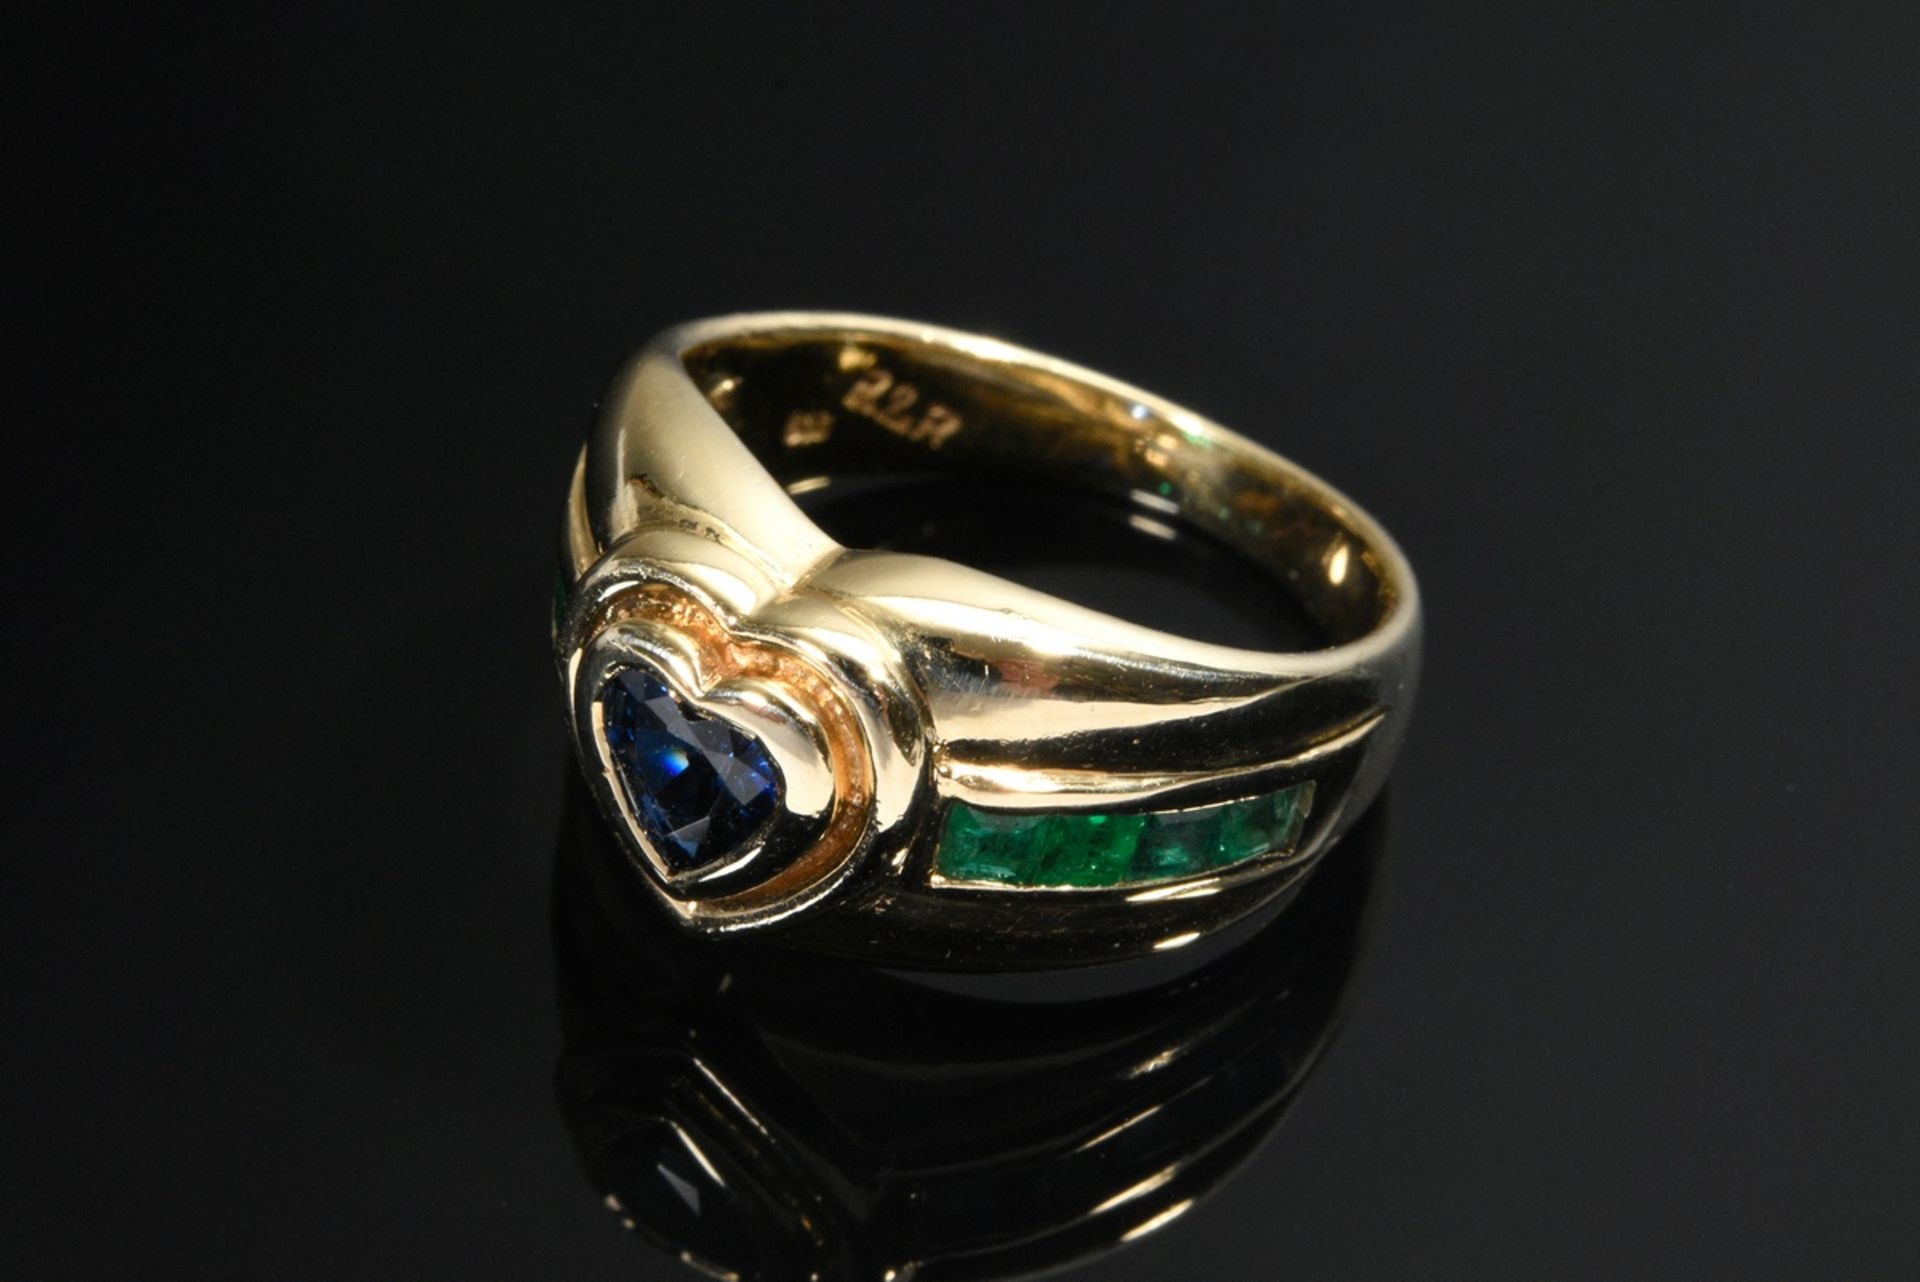 Yellow gold 585 band ring with sapphire heart and 8 emerald carrés, 4.6g, size 49 - Image 2 of 4